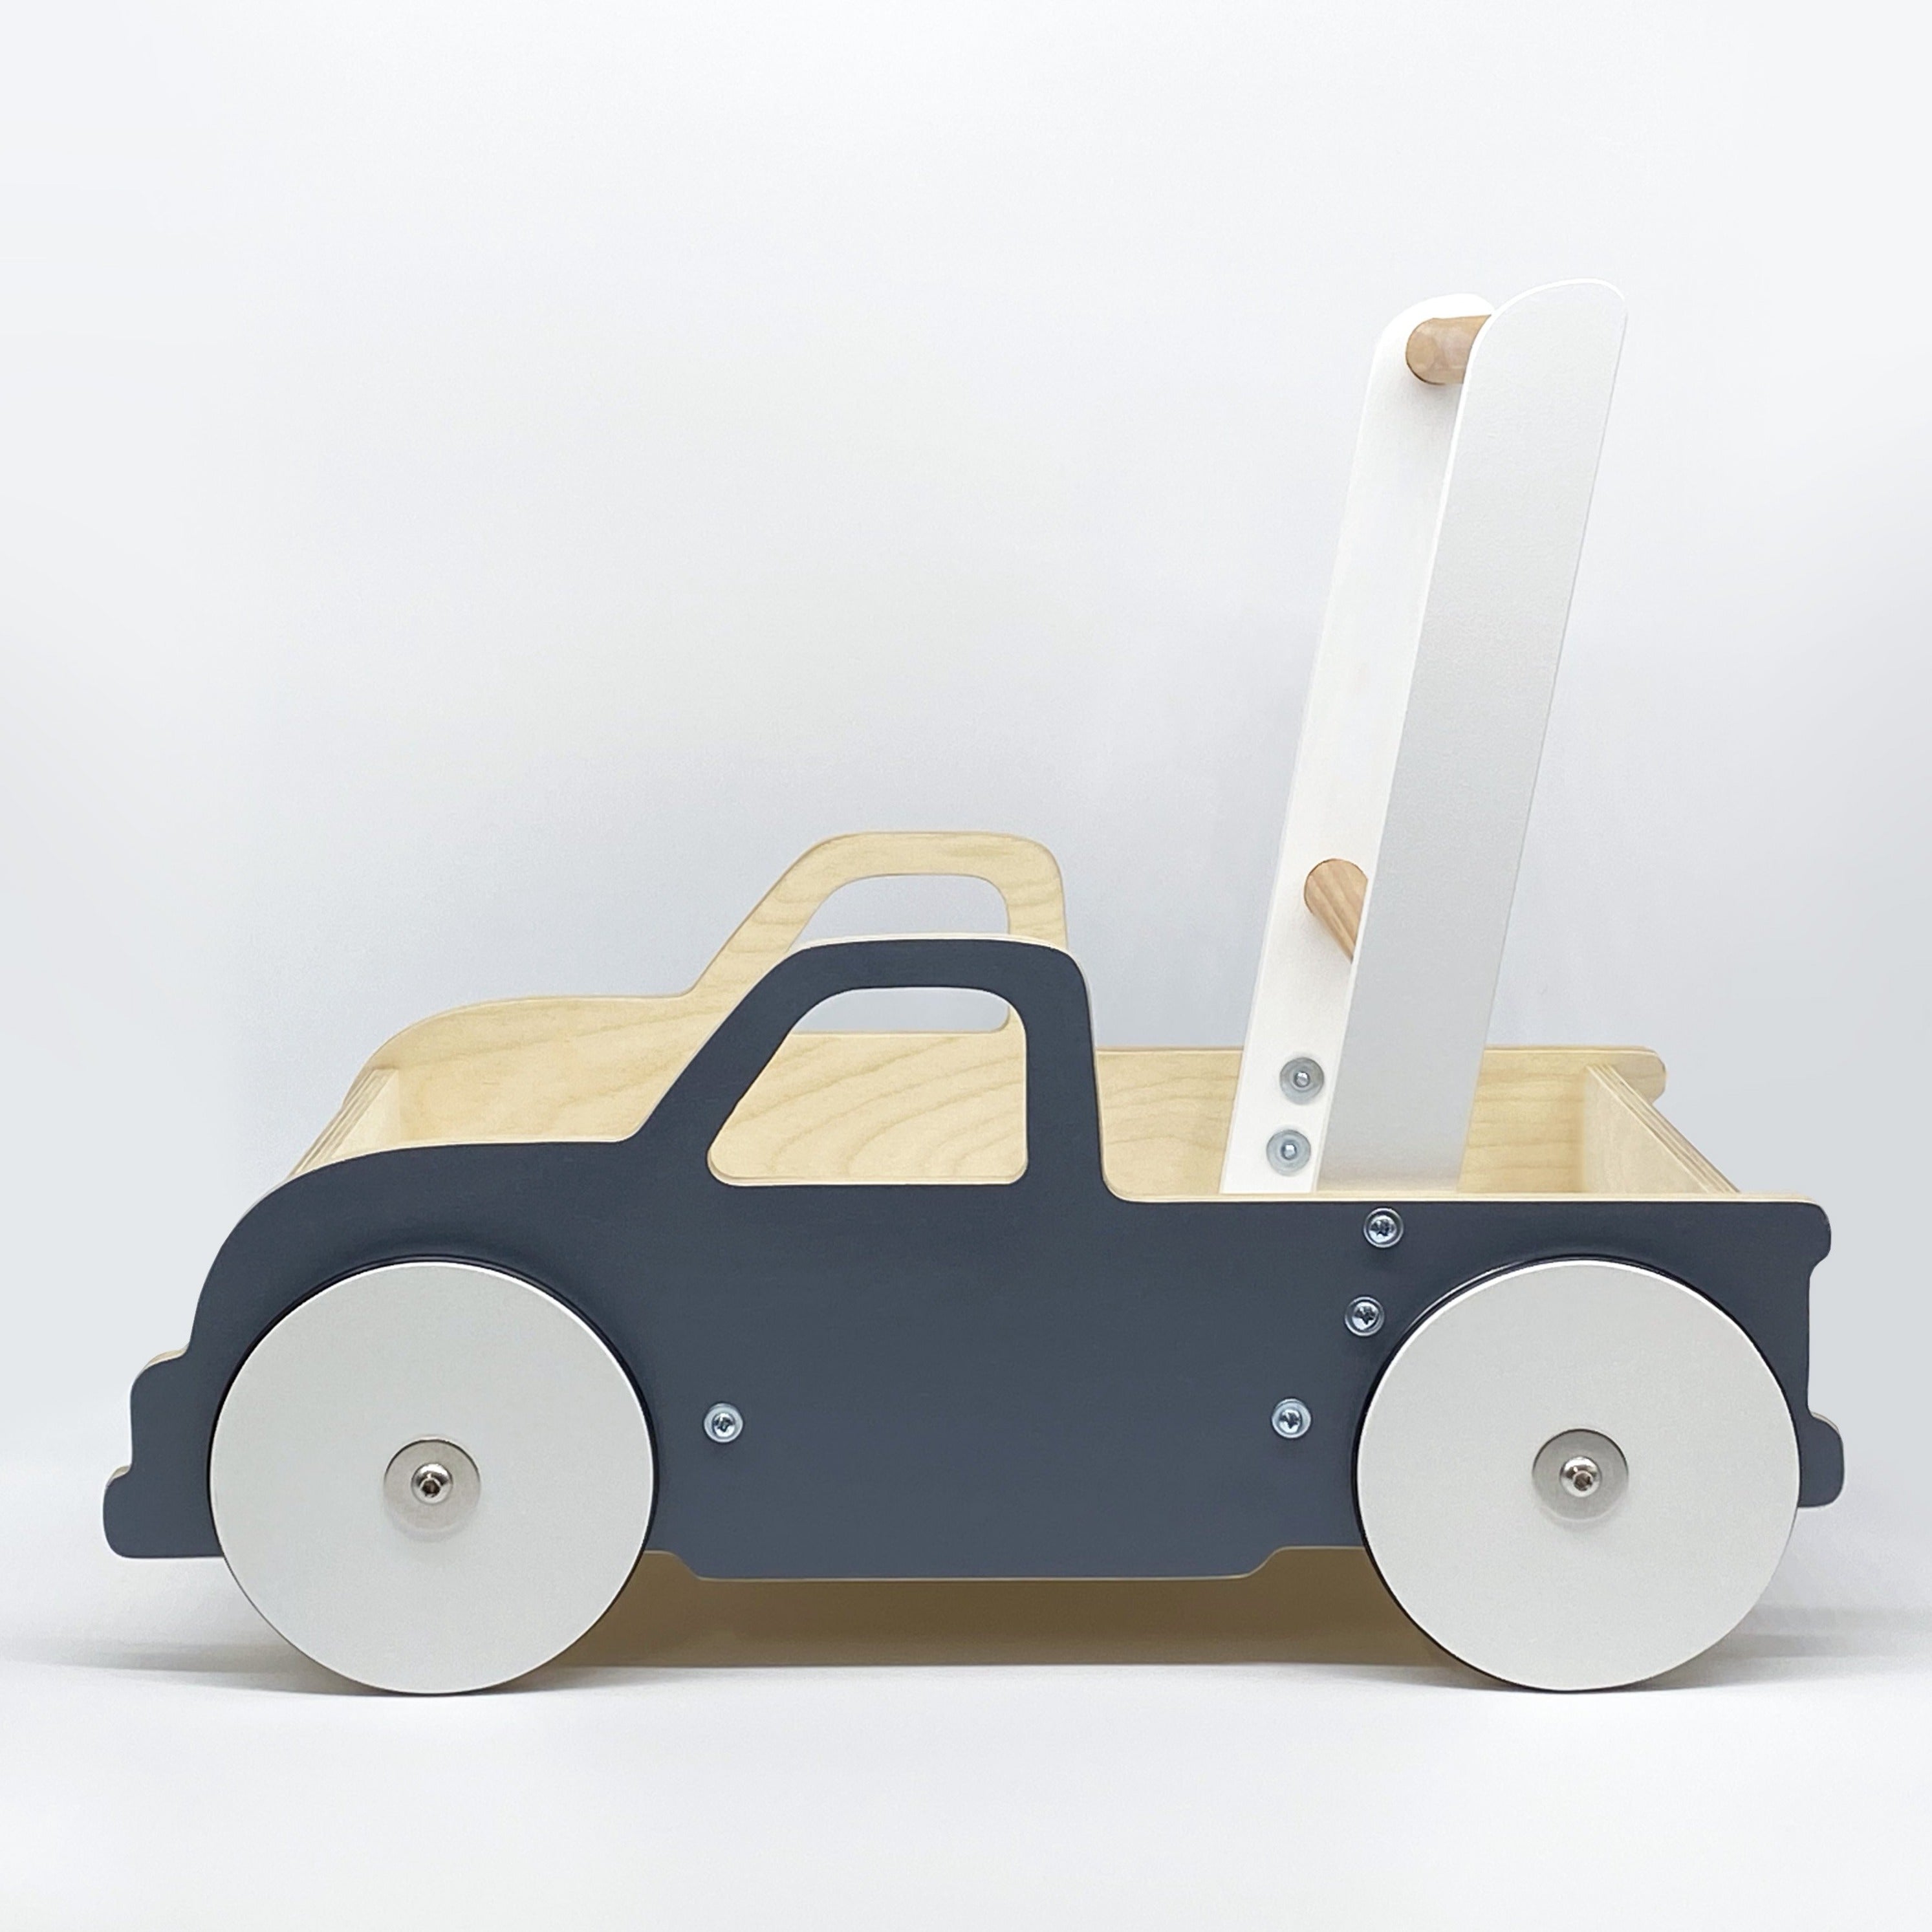 Luma Buggy: Charcoal Gray Truck Handcrafted Baby Wooden Push Walker Cart